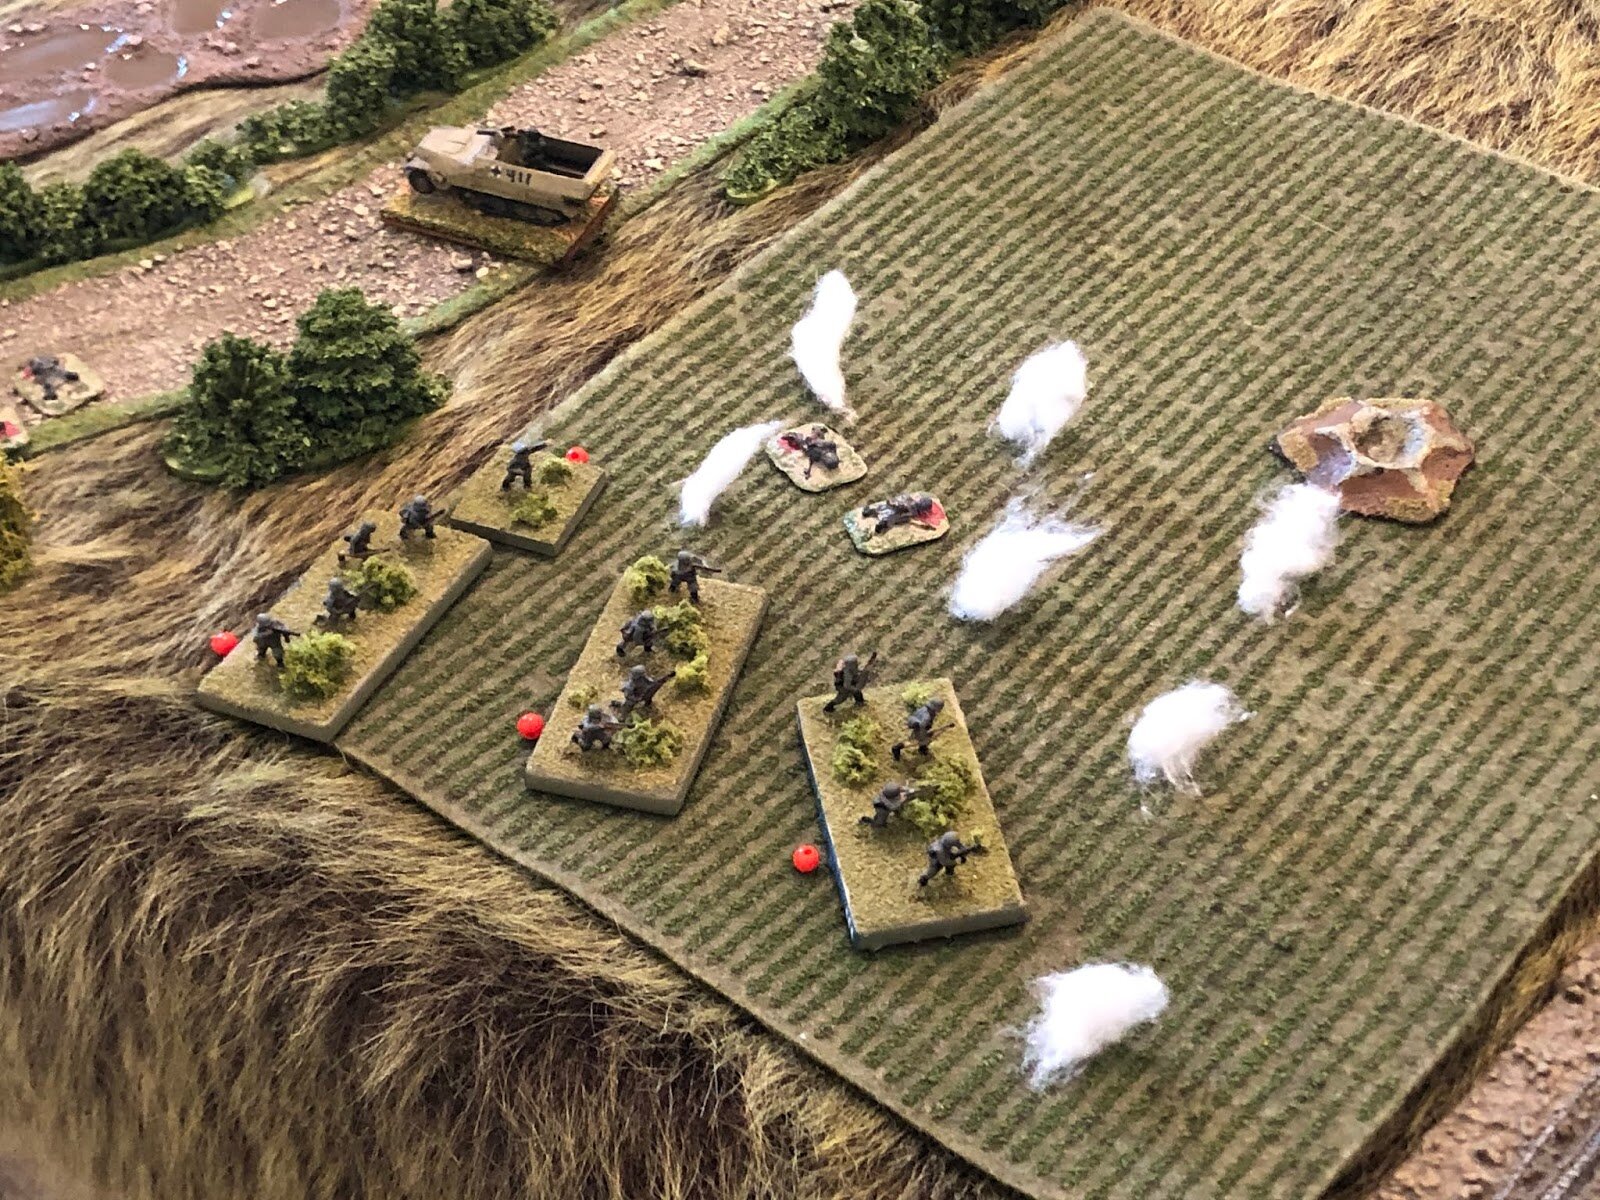  On the German right, just as 1st Plt, 1st Co, was getting moving again, Soviet mortars resume pounding them, suppressing both 1st and 3rd Platoons, even knocking out one of 3rd Platoon's squads. 